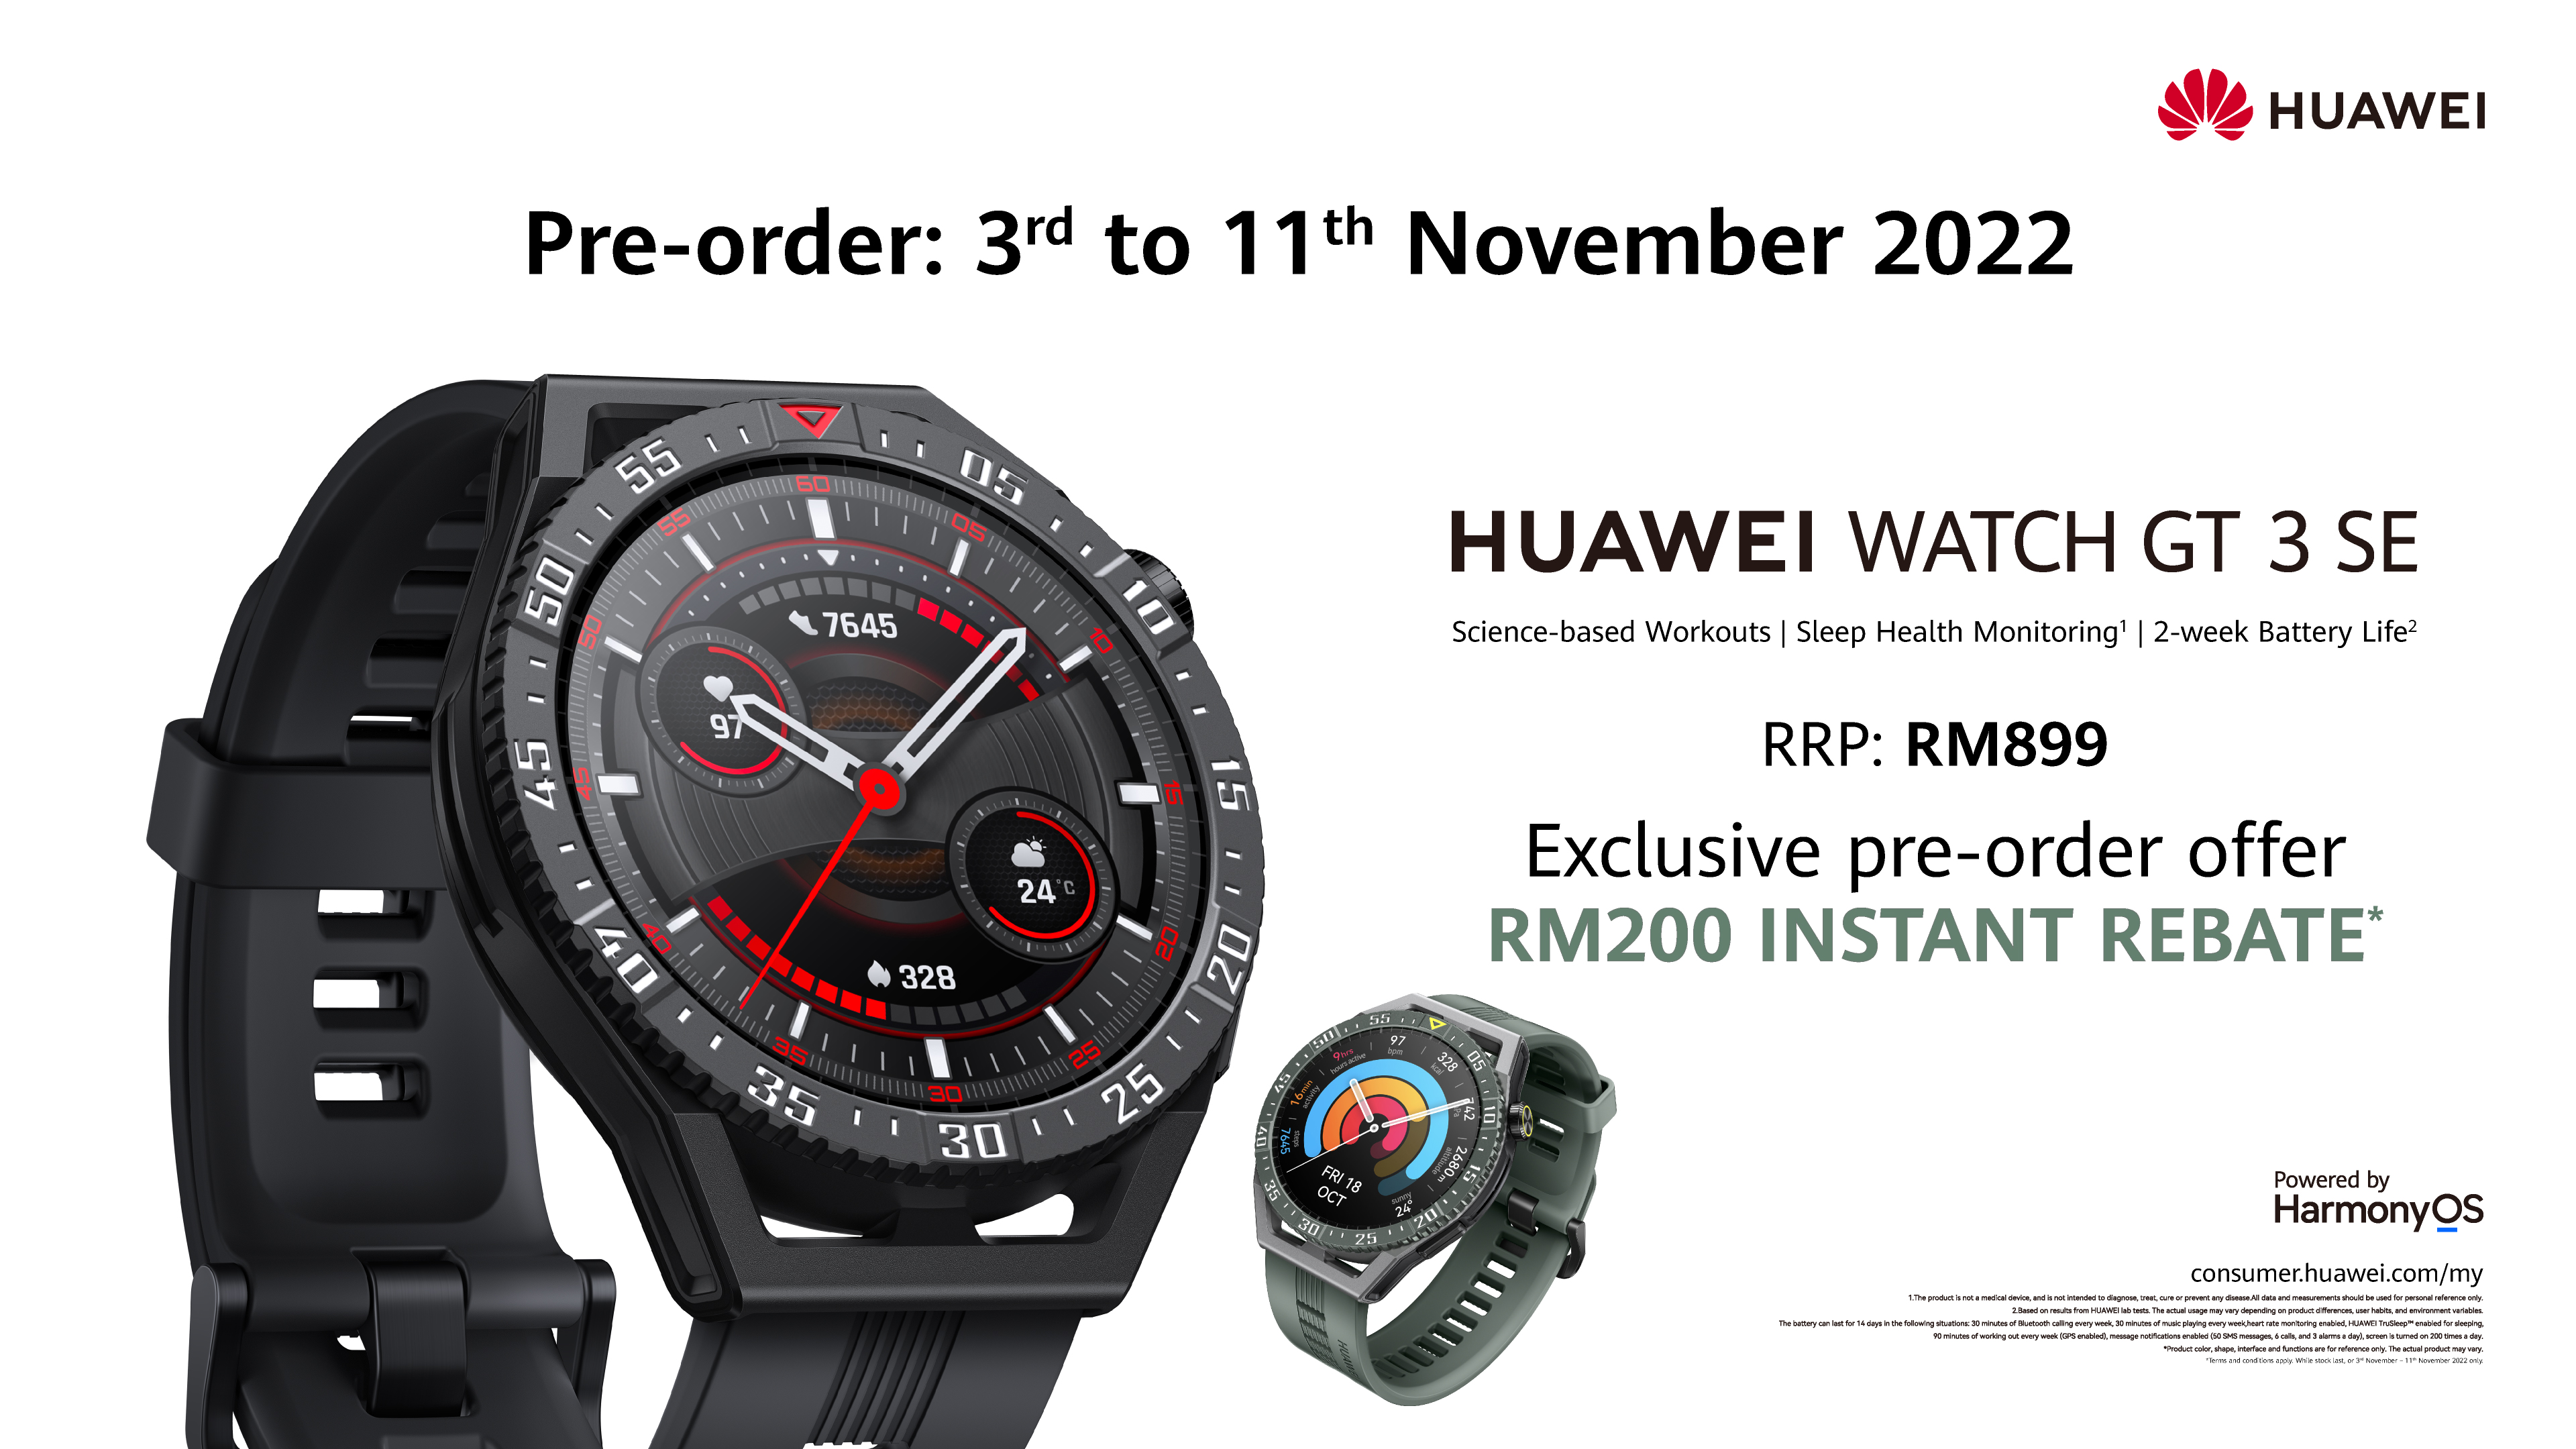 Huawei's Latest Watch GT 3 SE Now Up For Grabs With RM200 Rebate!